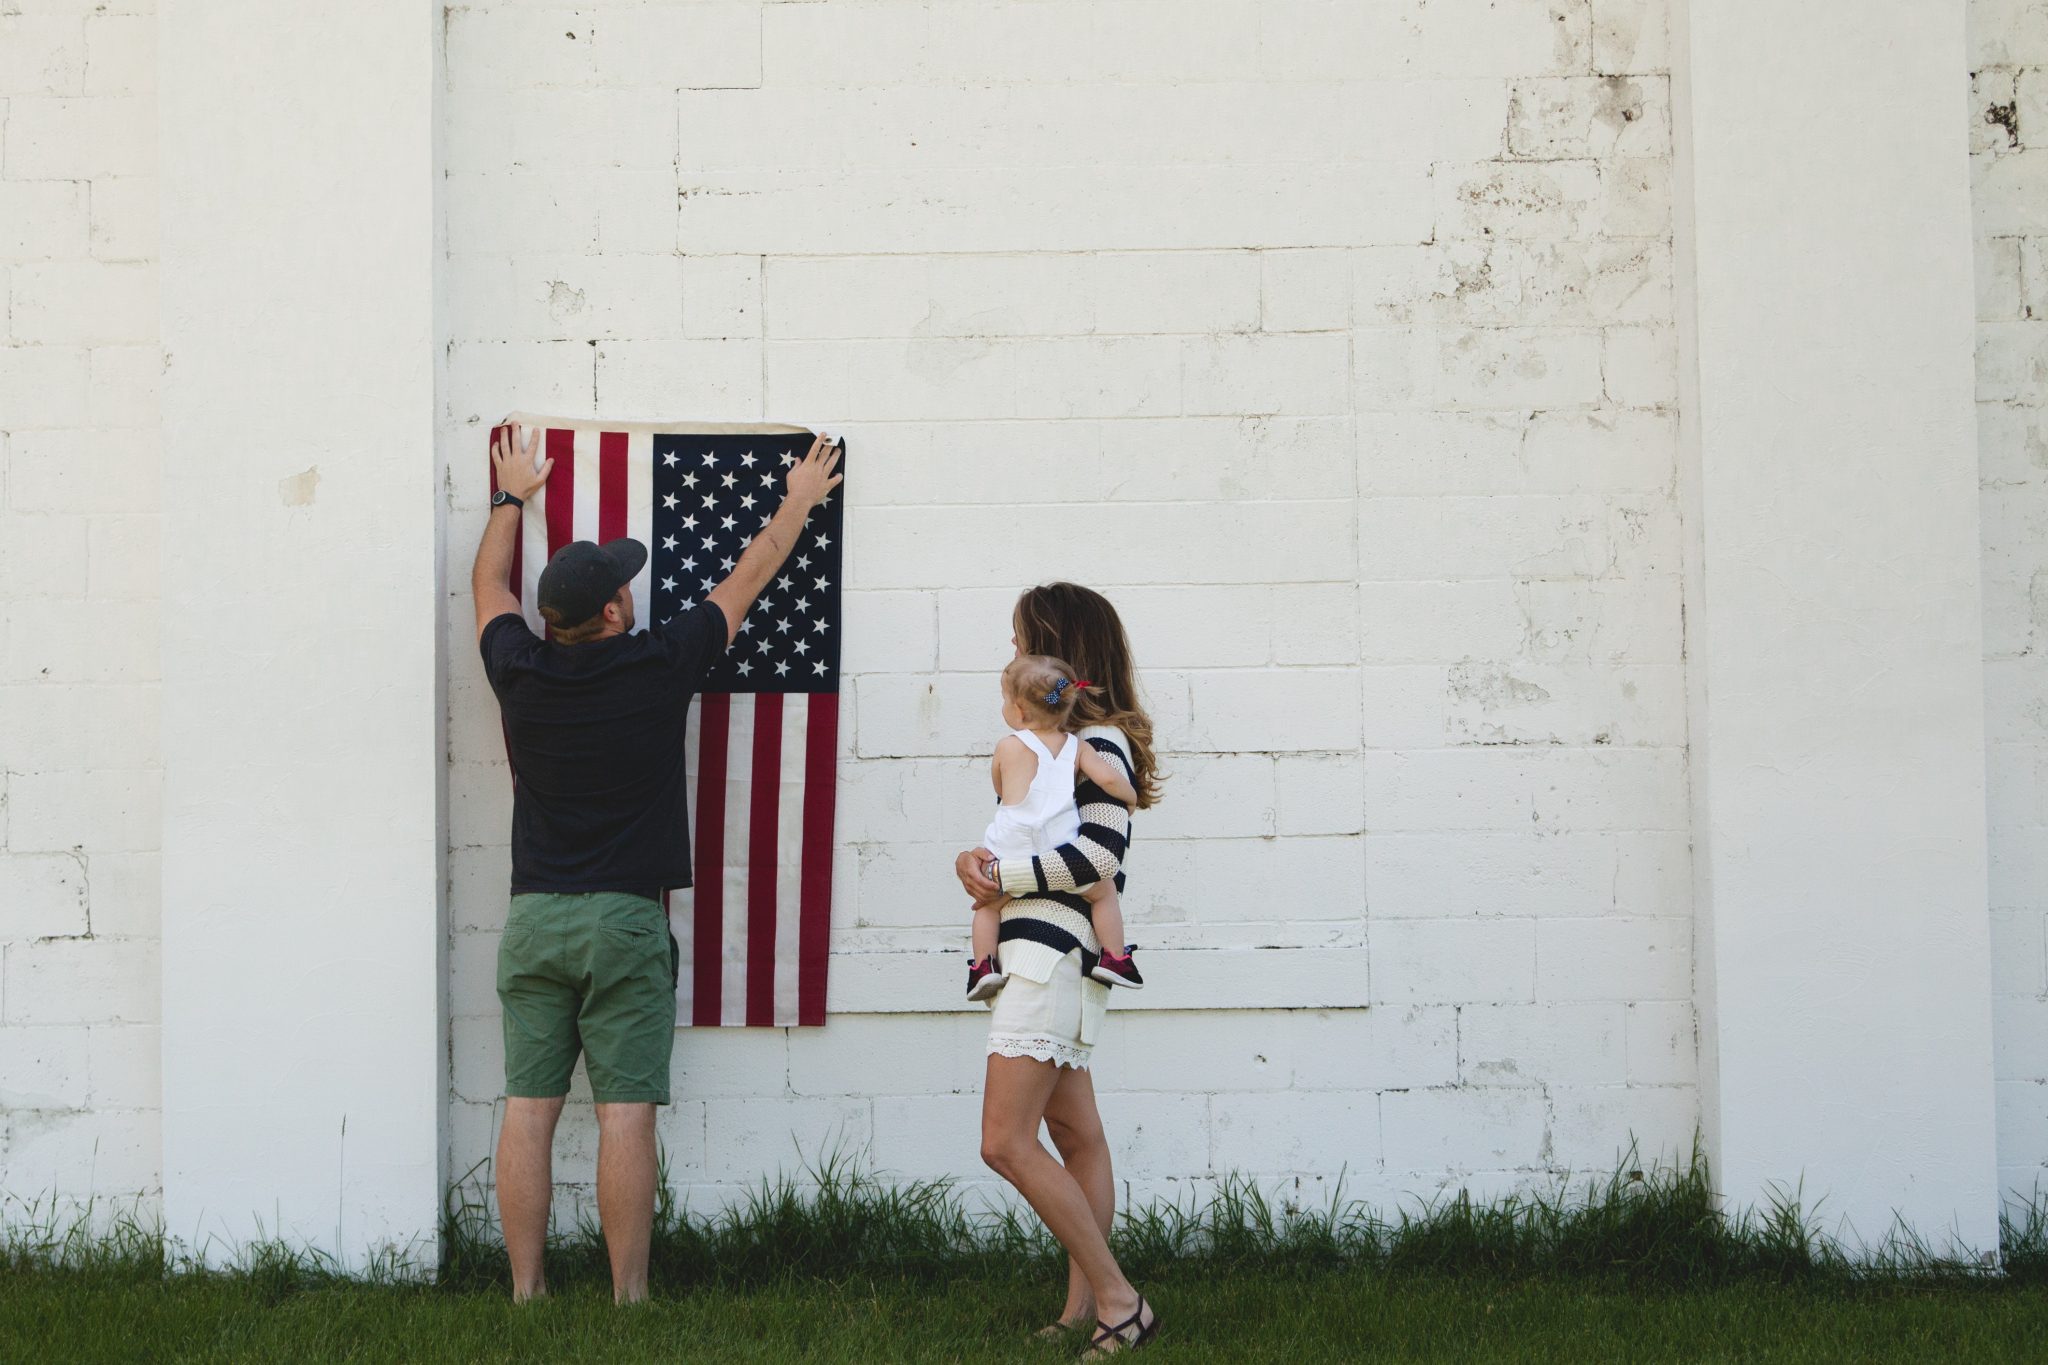 Photo of woman holding baby while man puts up American flag on building